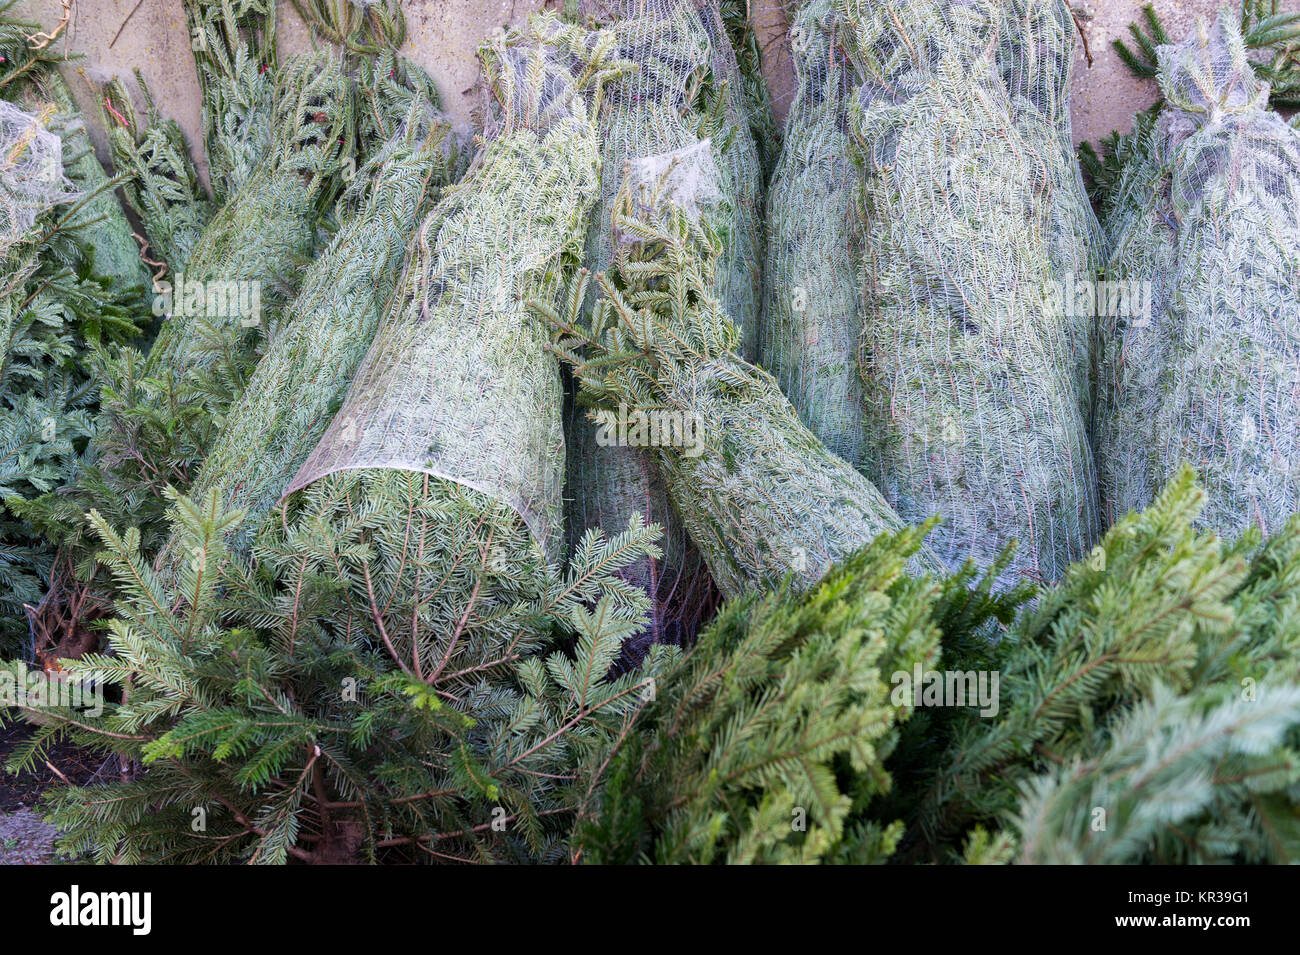 Christmas trees in a pile bound and ready for sale. Stock Photo